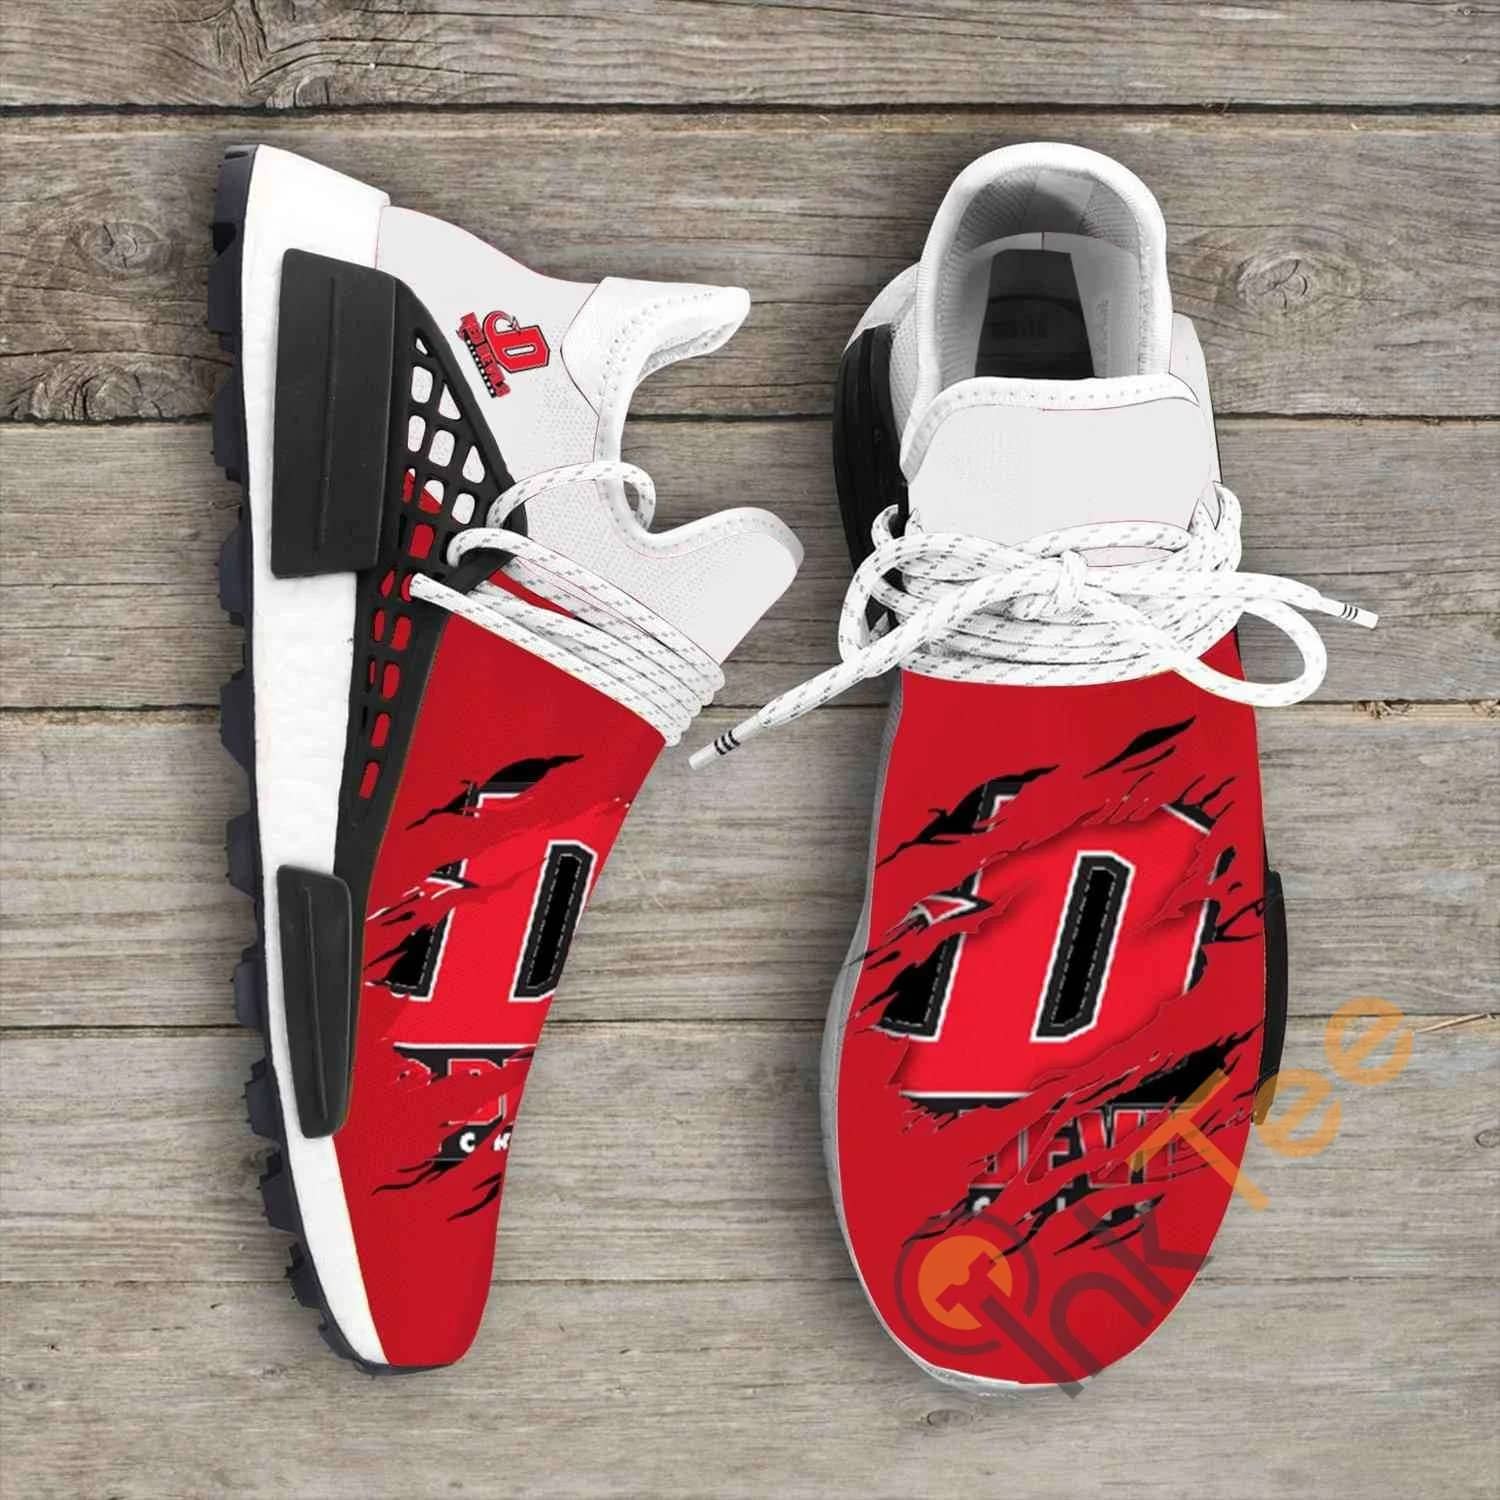 Dickinson College Red Devils Ncaa Sport Teams Nmd Human Shoes